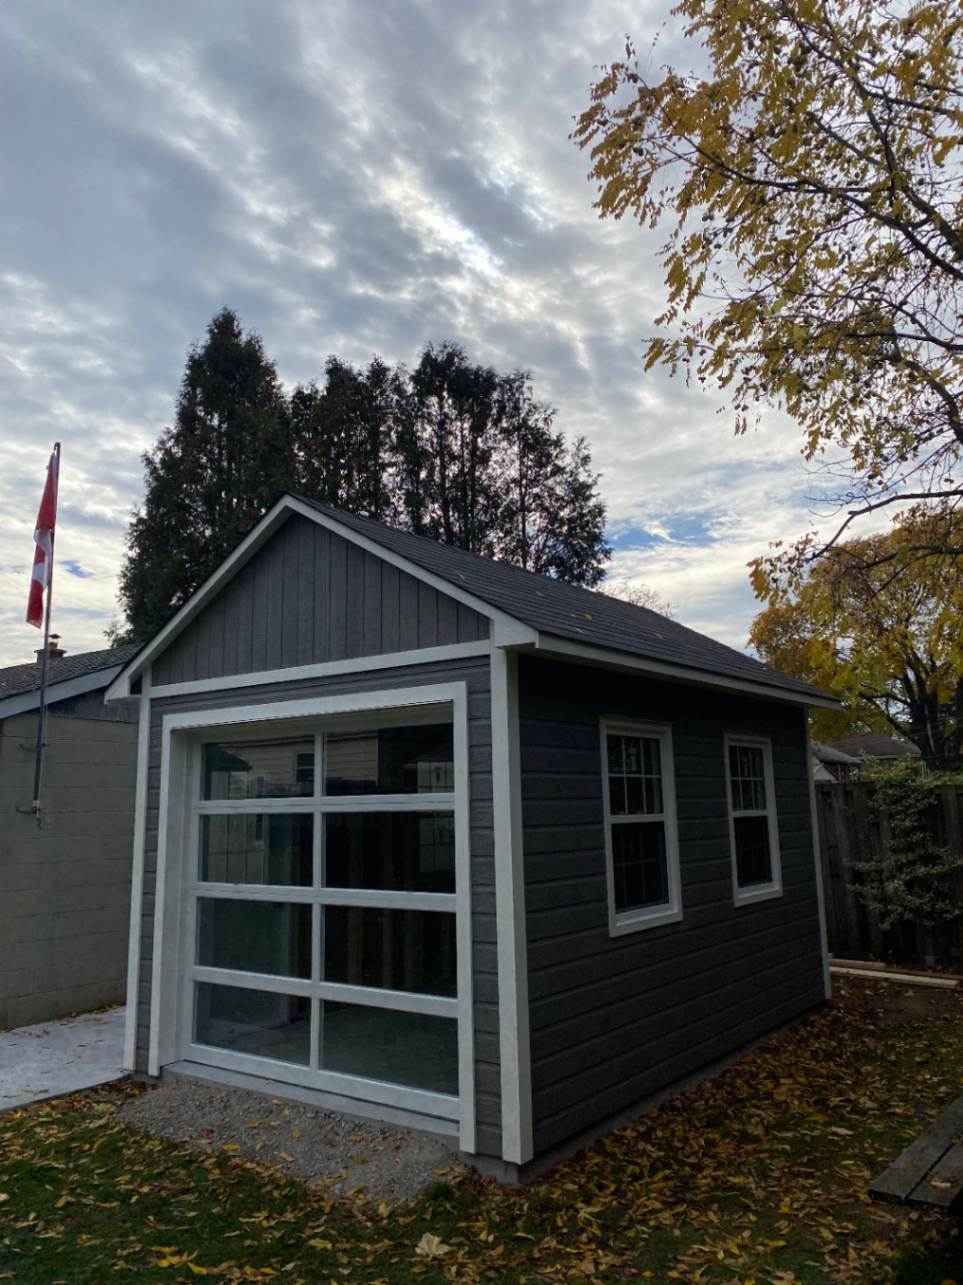 Front view of 10’ x 10' Palmerston Garden Shed located in Hamilton, Ontario – Summerwood Product